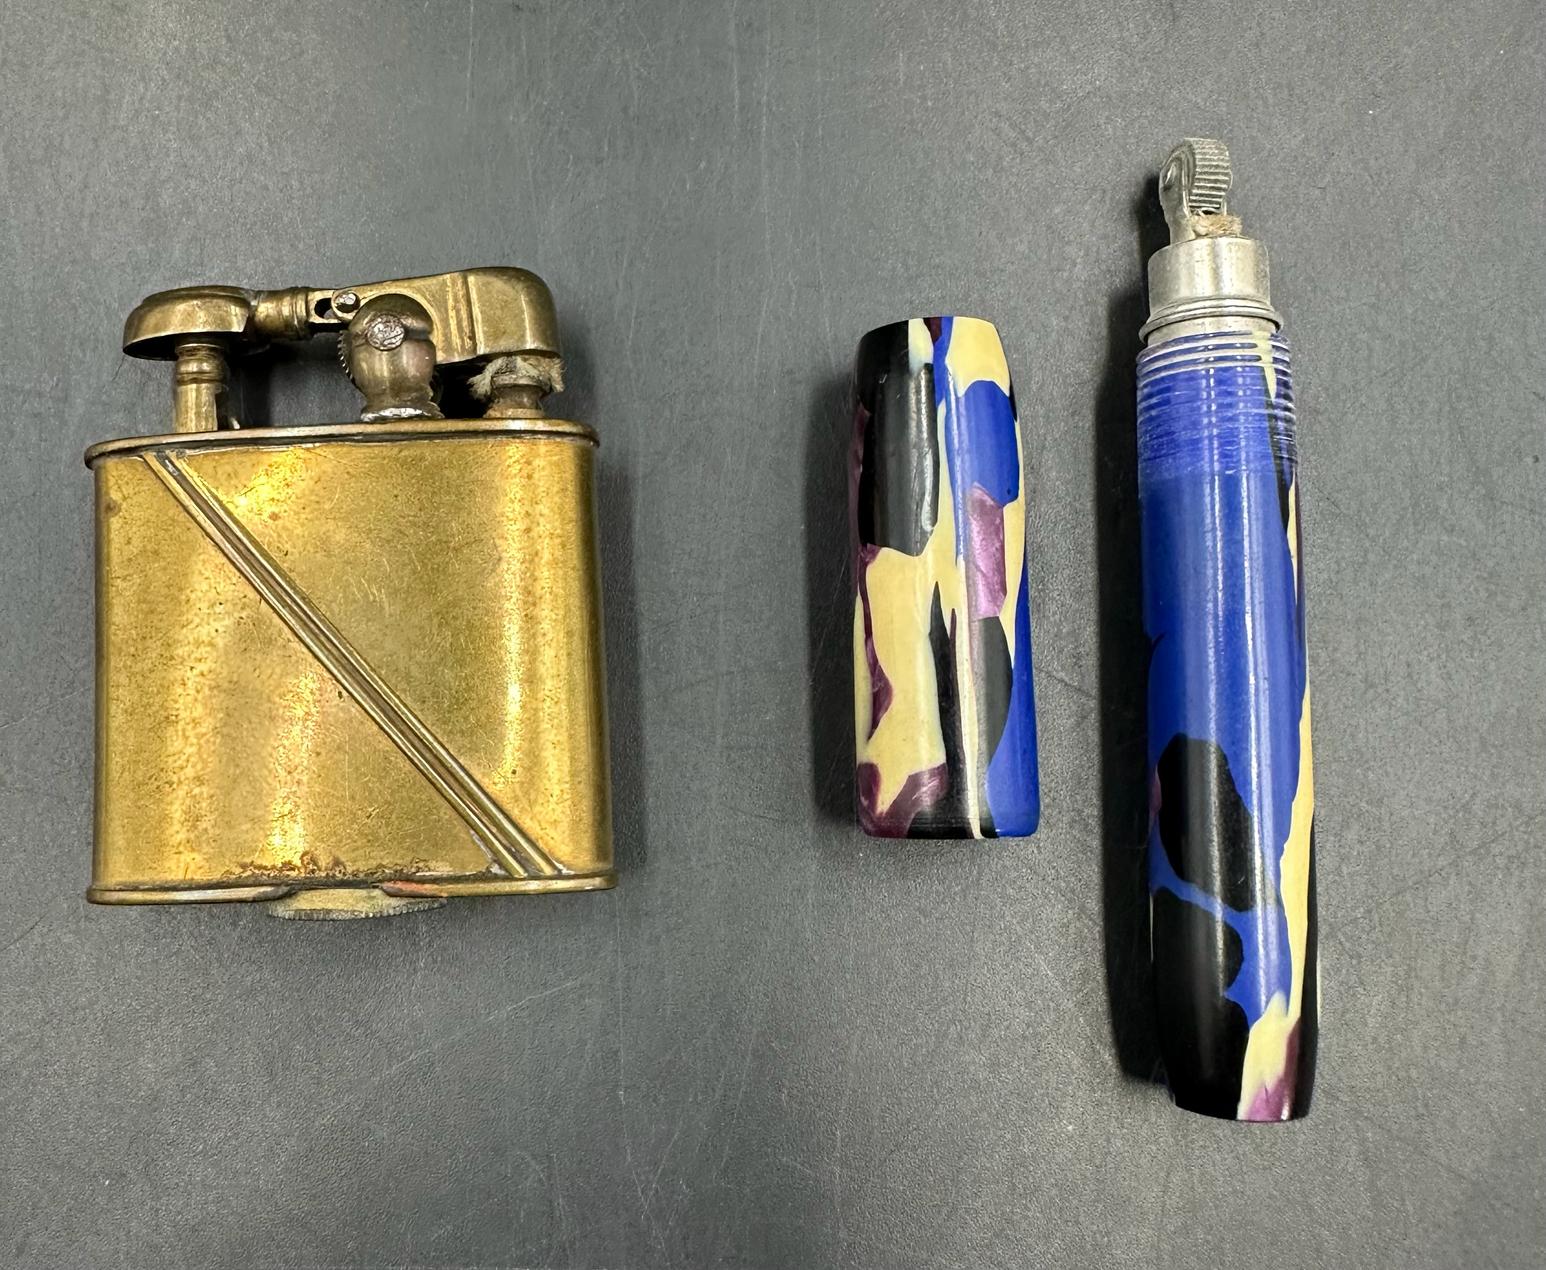 A pre war Dainty lighter in pen form and an unmarked brass lighter